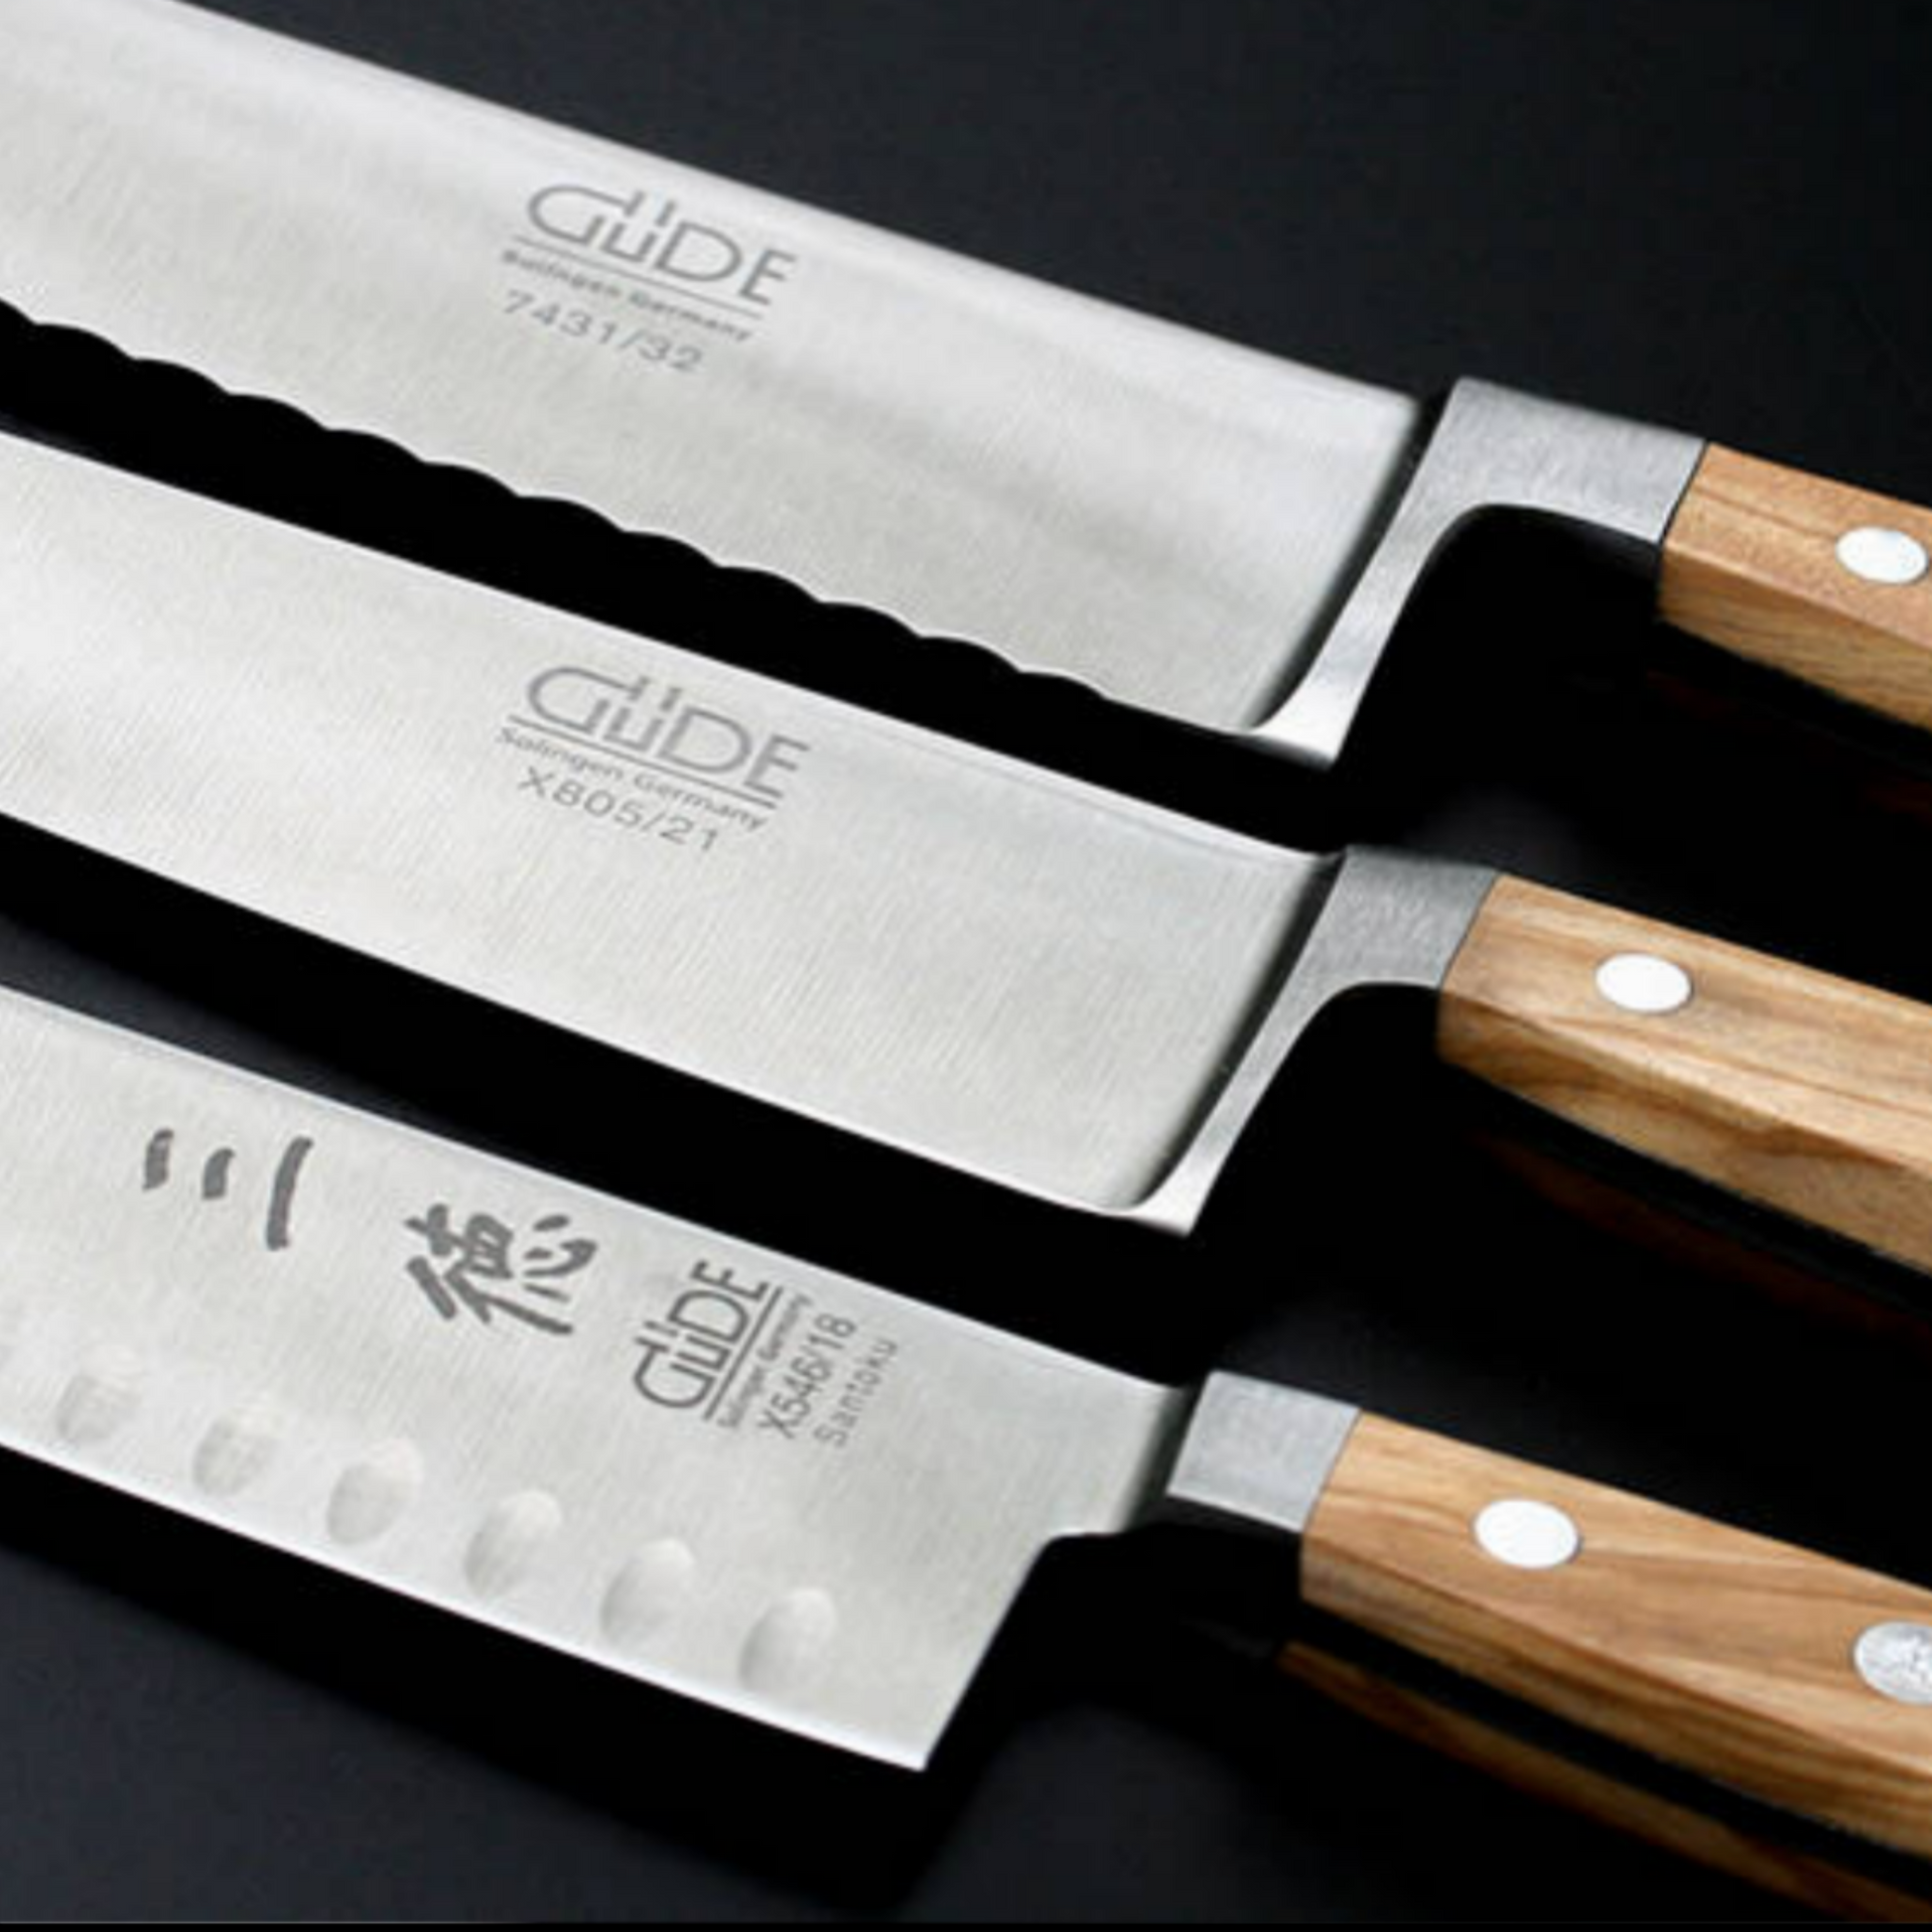 Gude Alpha Olive Series Forged Double Bolster Santoku Knife 5", Olivewood Handle and Granton Edge - GuedeUSA